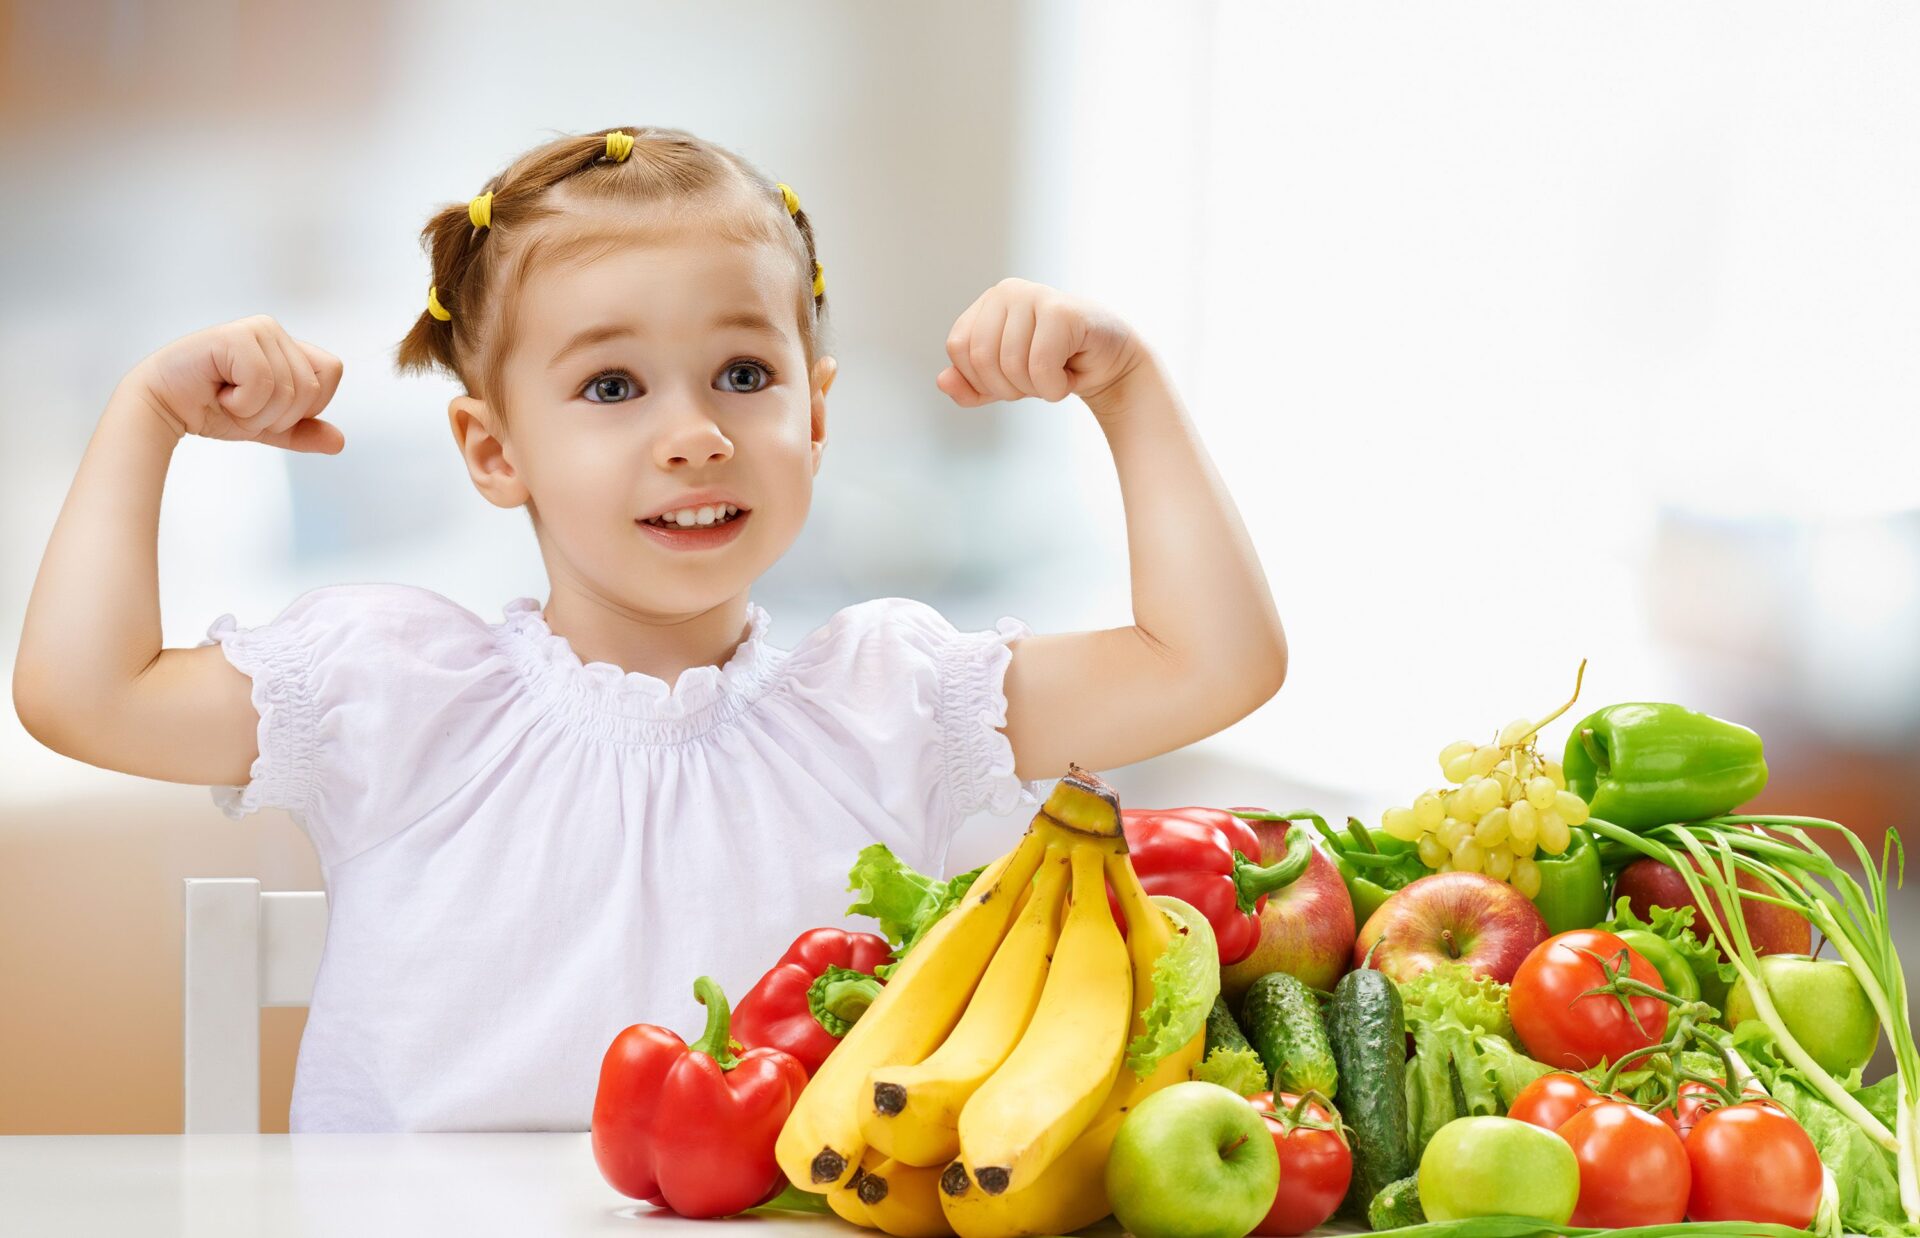 The role of nutrition in our lives